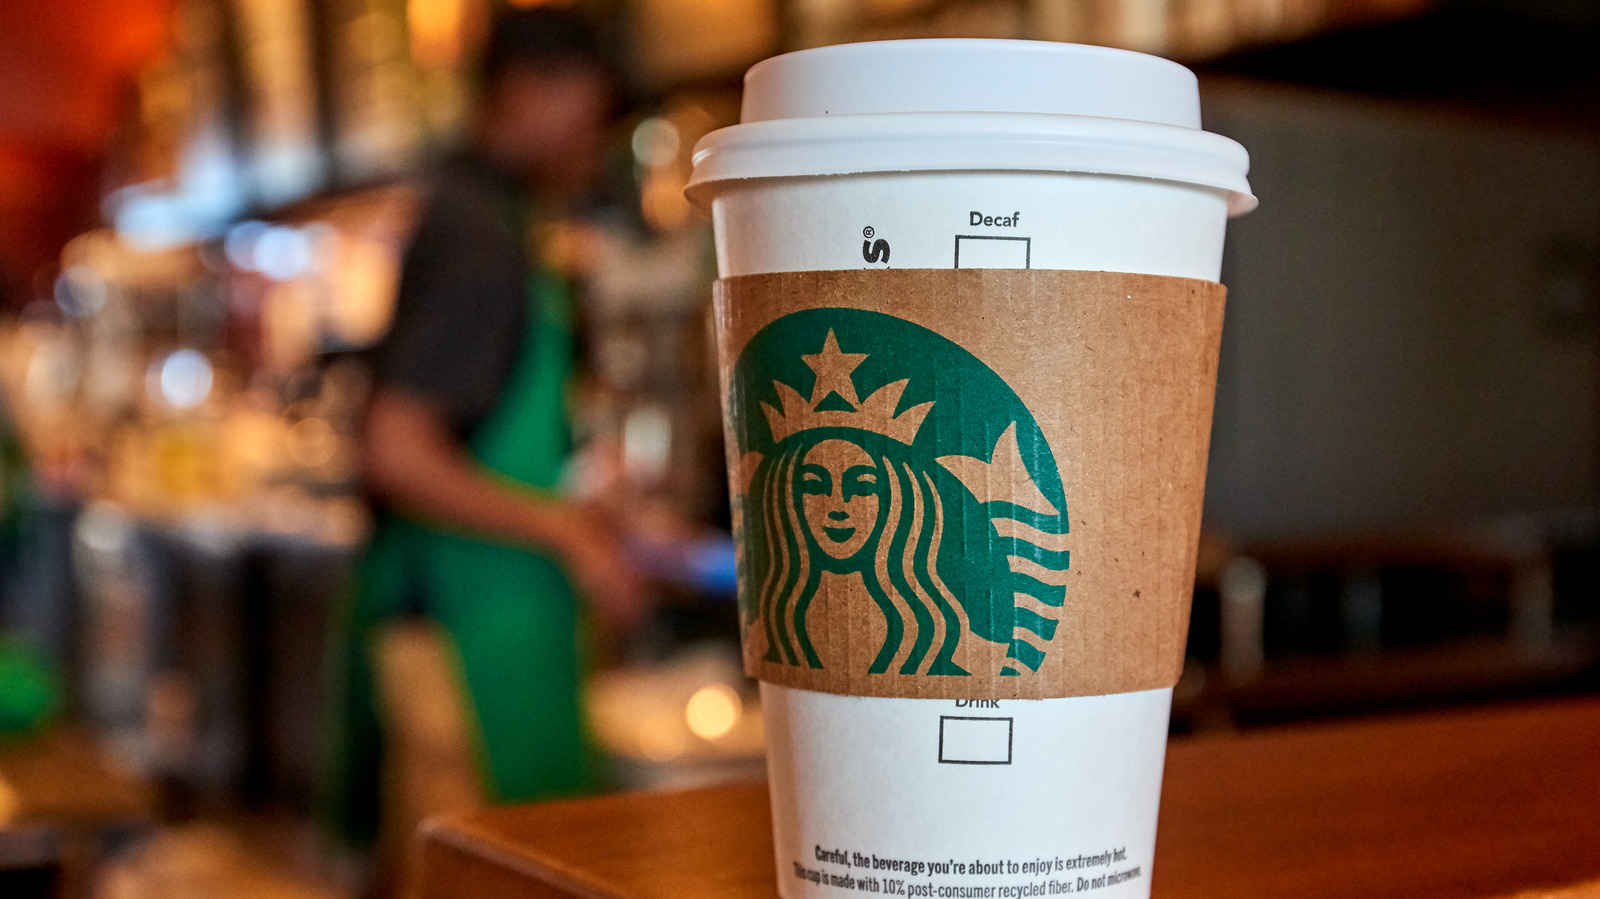 https://www.mashed.com/img/gallery/are-starbucks-baristas-allowed-to-create-their-own-drinks/l-intro-1667489304.jpg